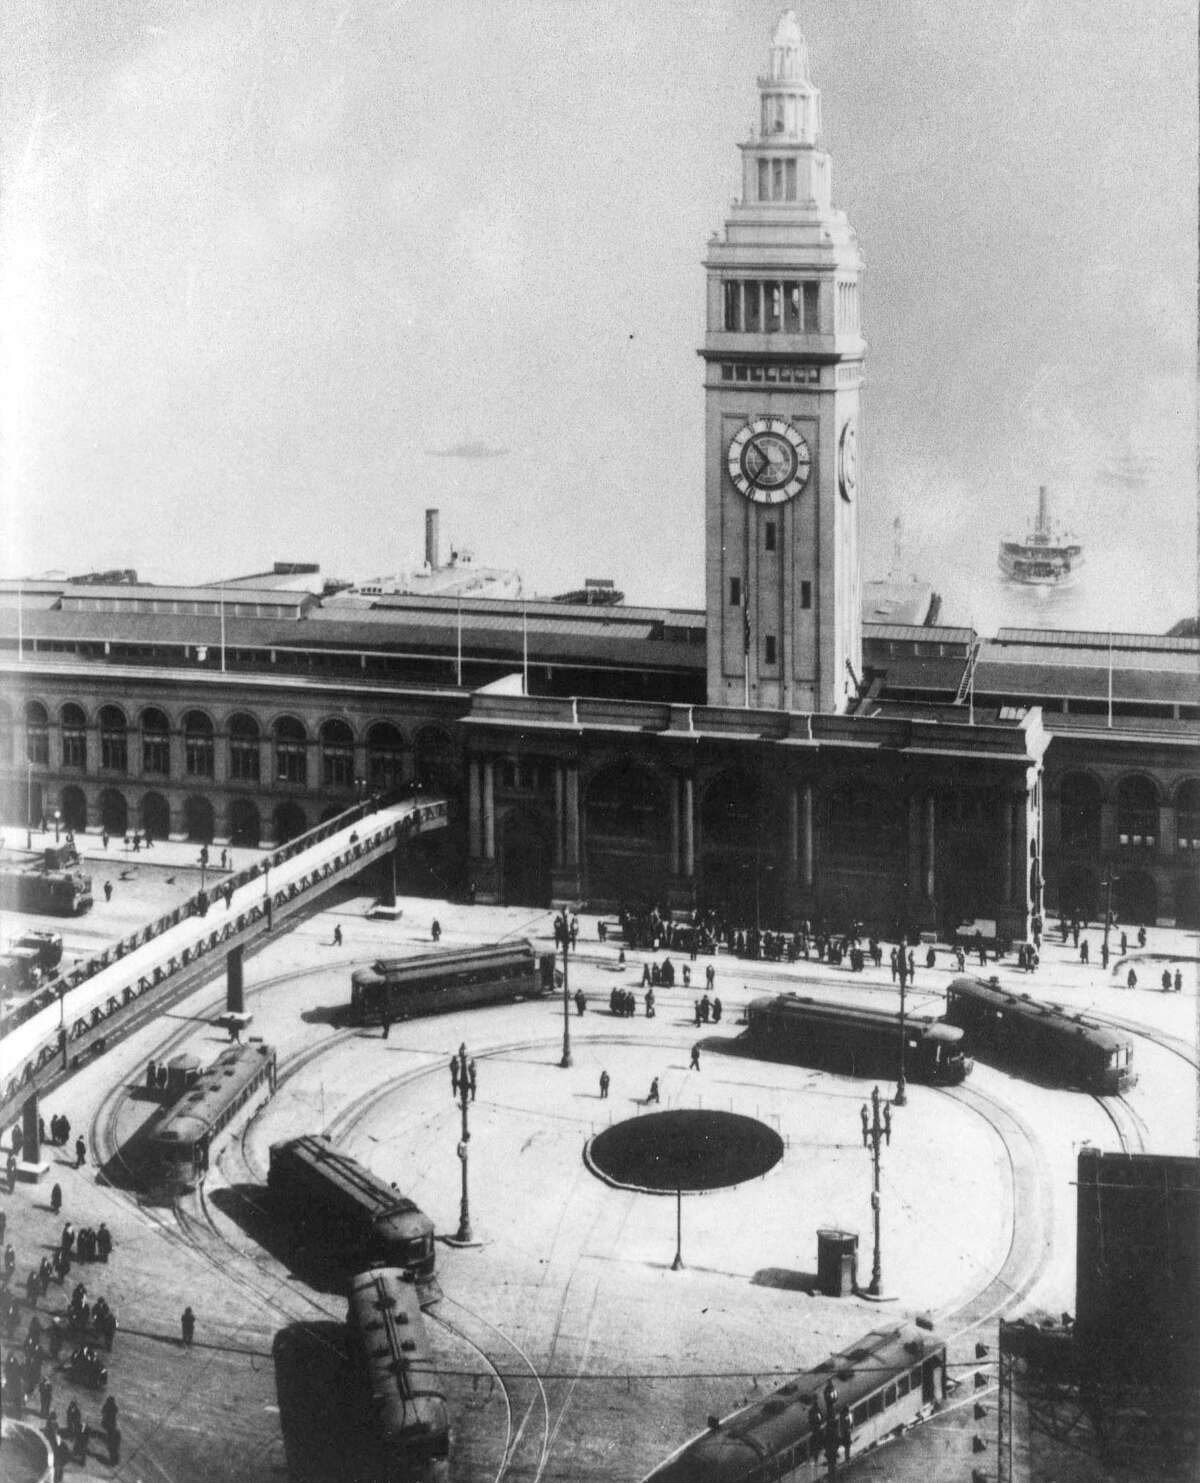 San Francisco Ferry Building about the 1920s.